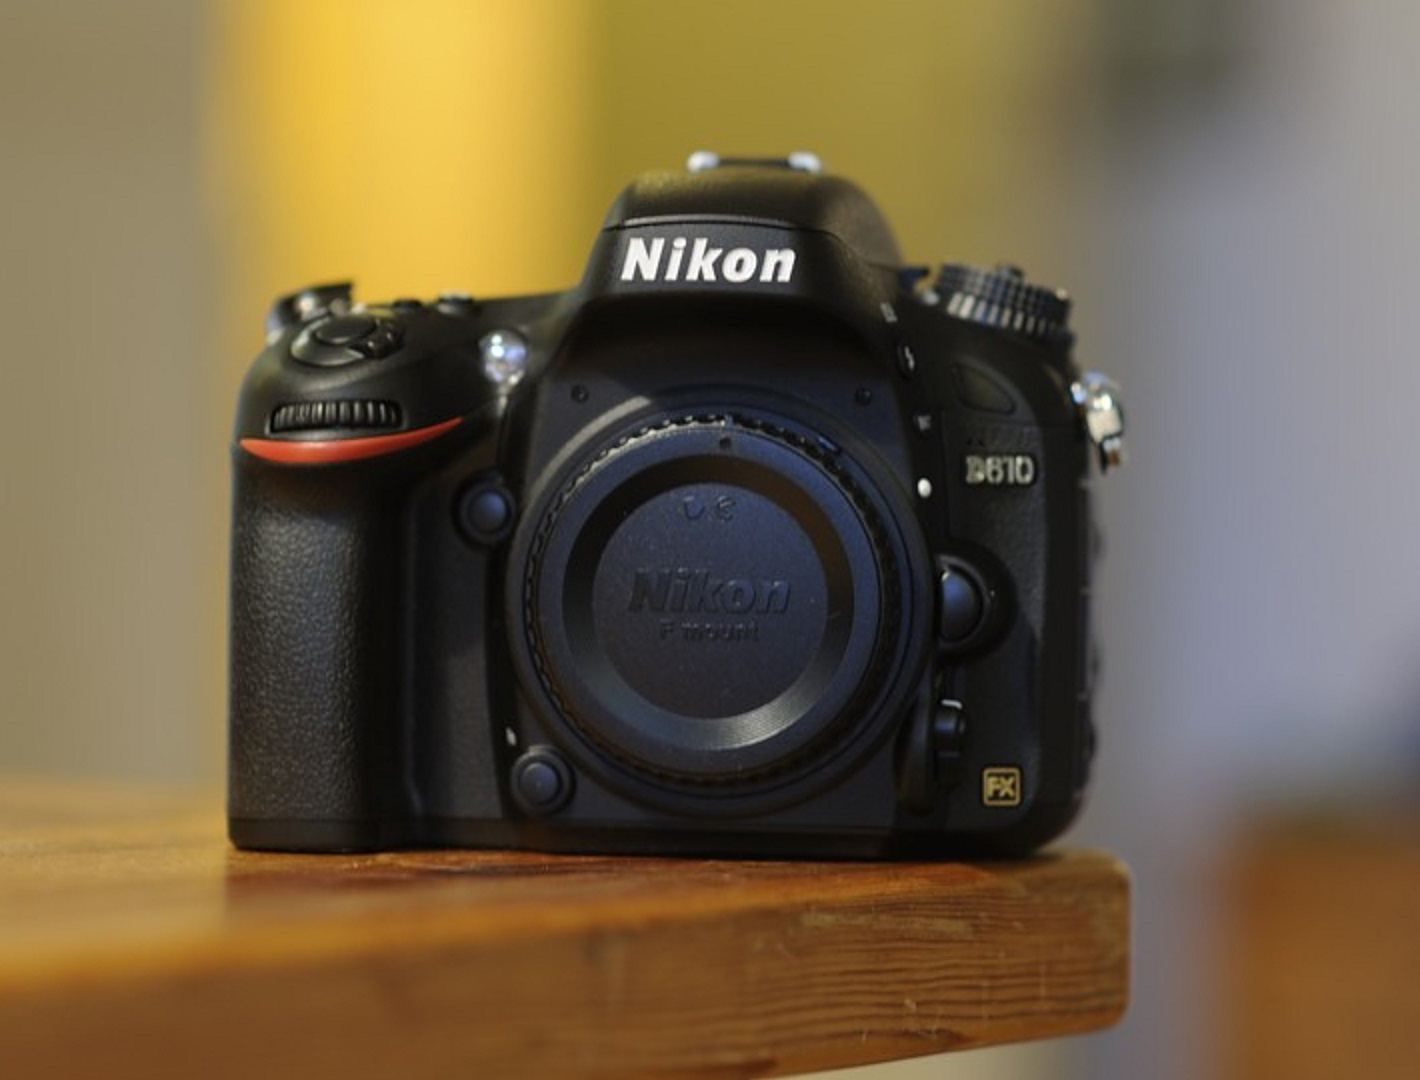 Hot Deal – Nikon D610 for $979 at Electronics Valley (Grey Market) !